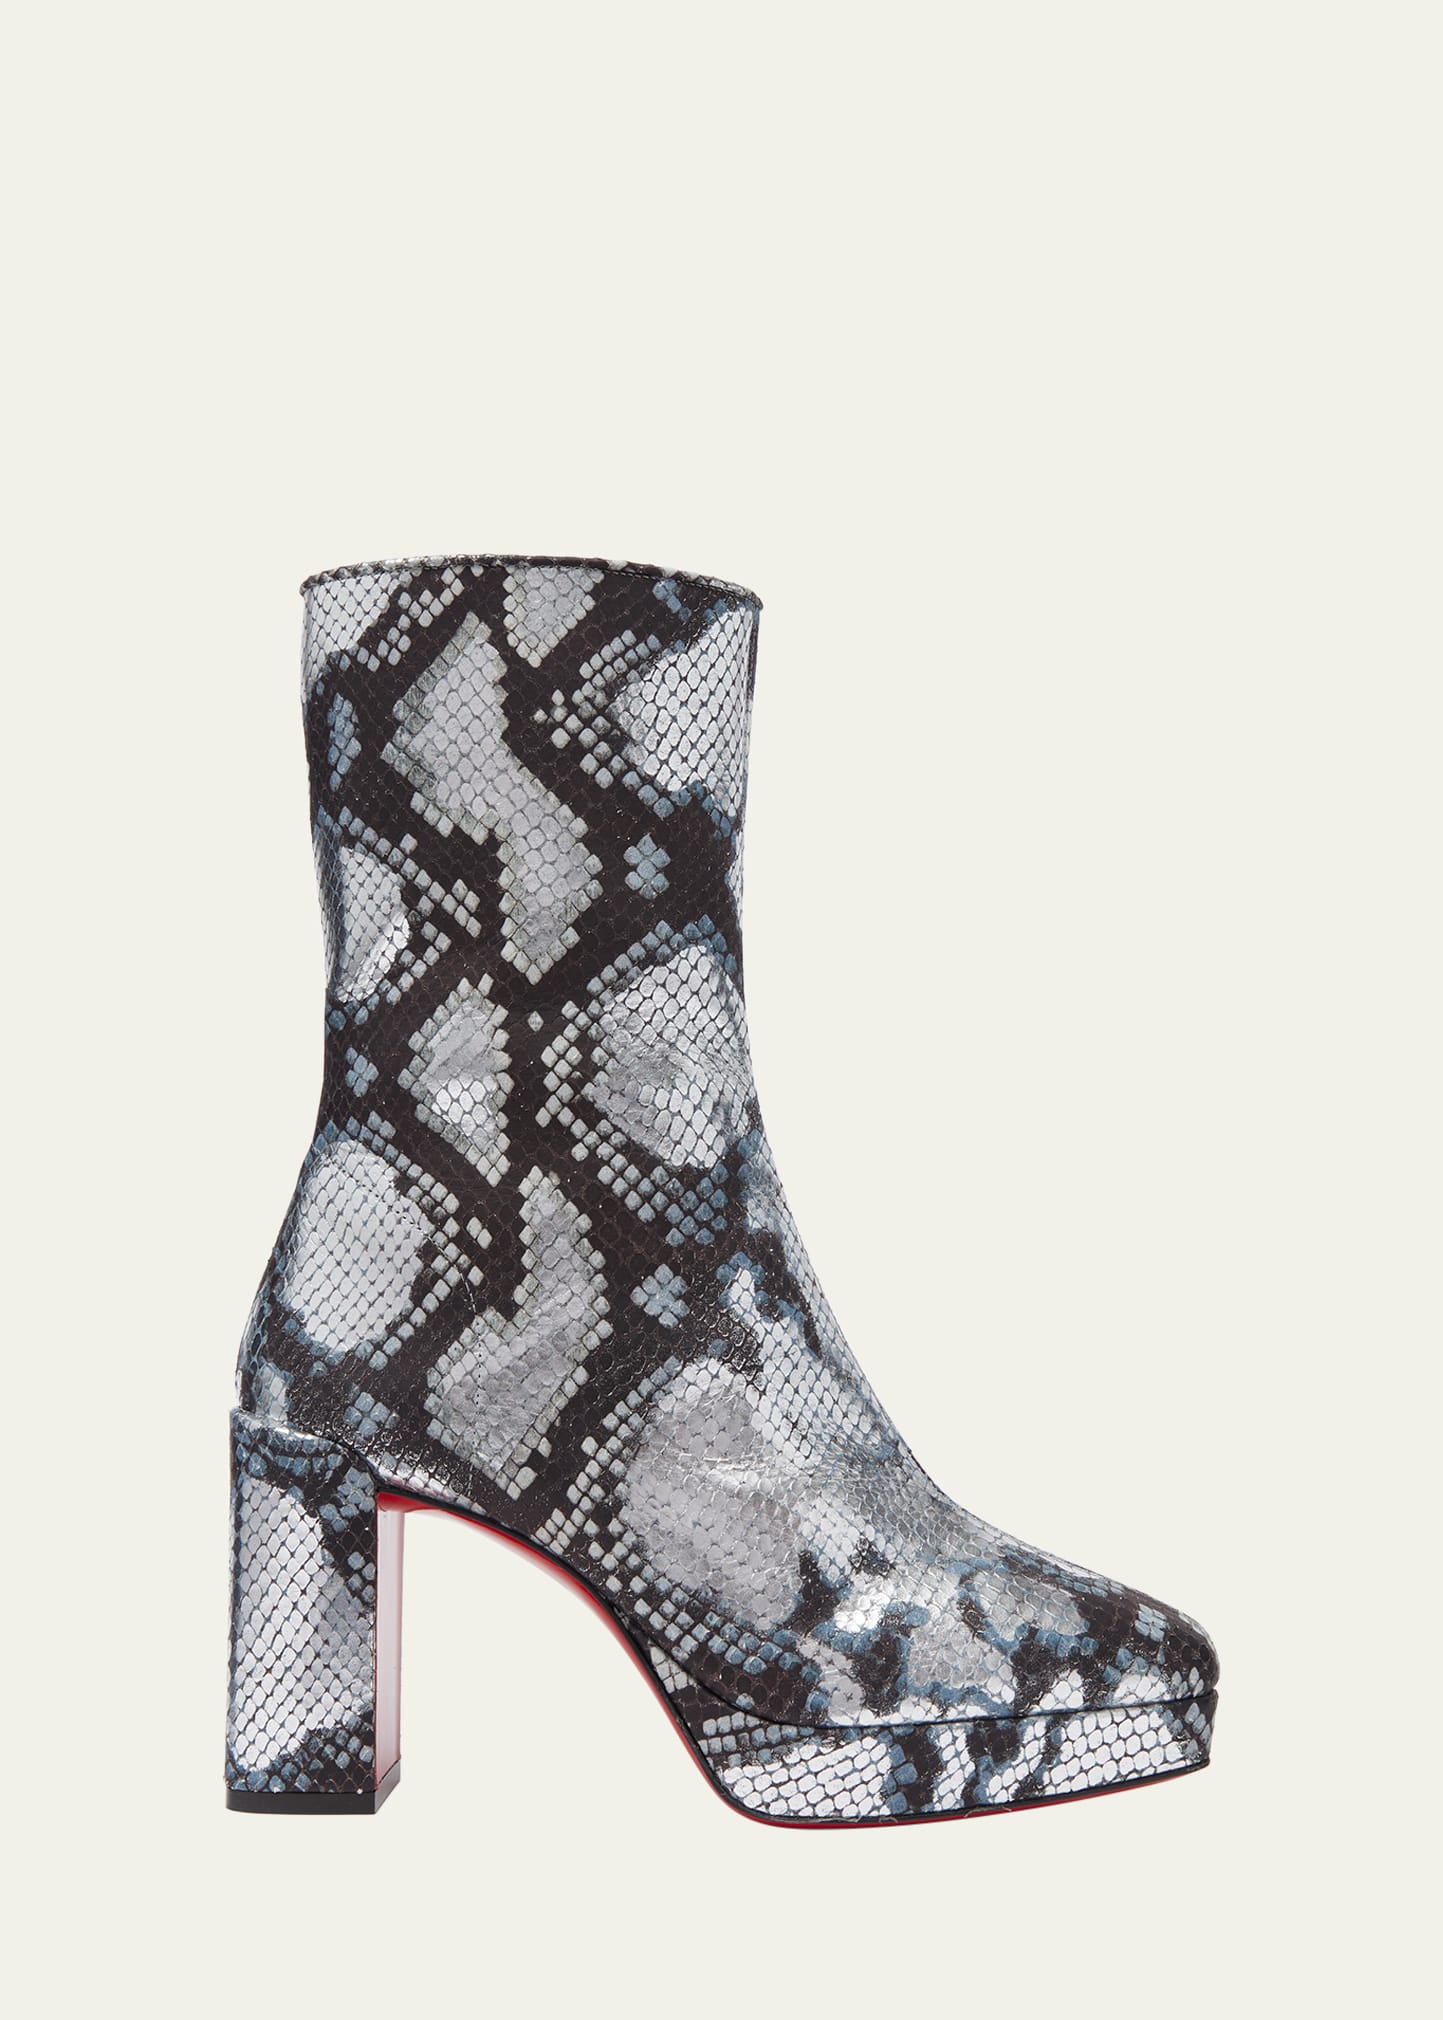 Alleo 90 Red Sole Snake-Embossed Booties